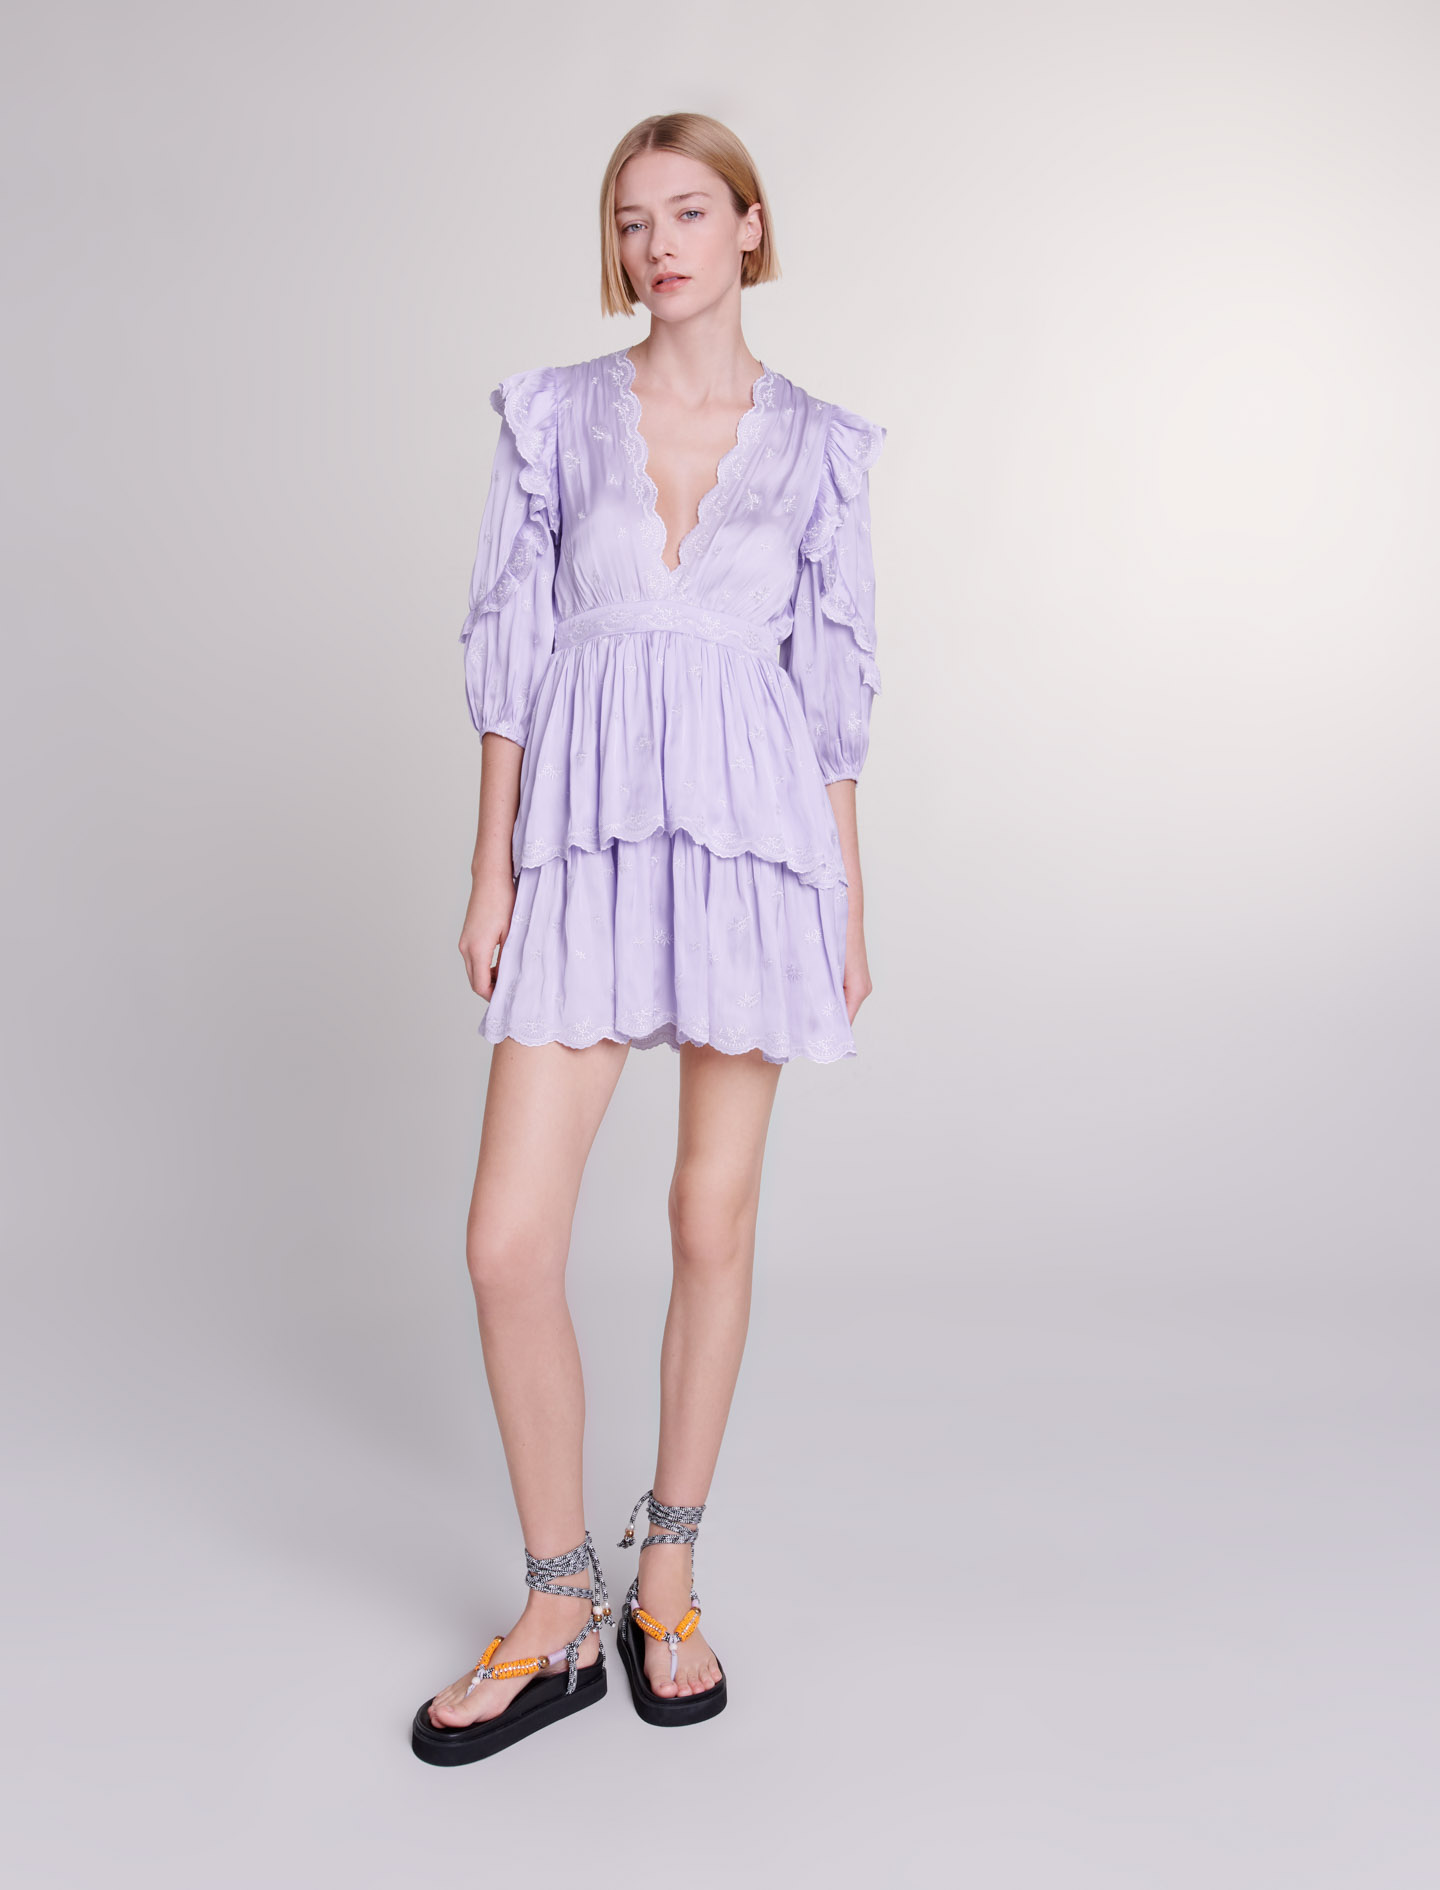 Maje Woman's polyester Embroidery: Short satin-look embroidered dress, in color Parma Violet / Red